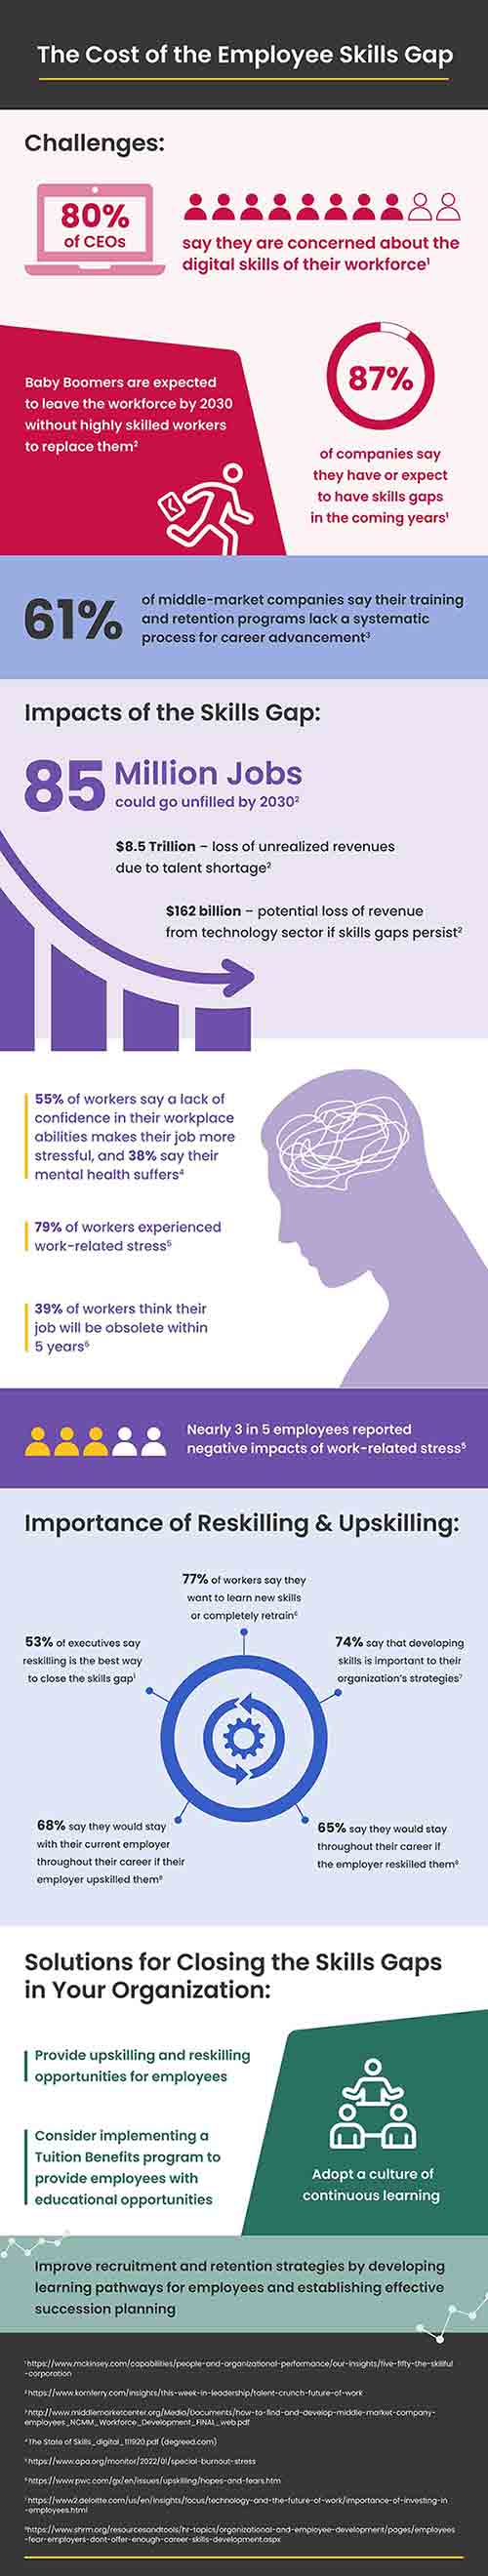 The Cost of the Employee Skills Gap Infographic